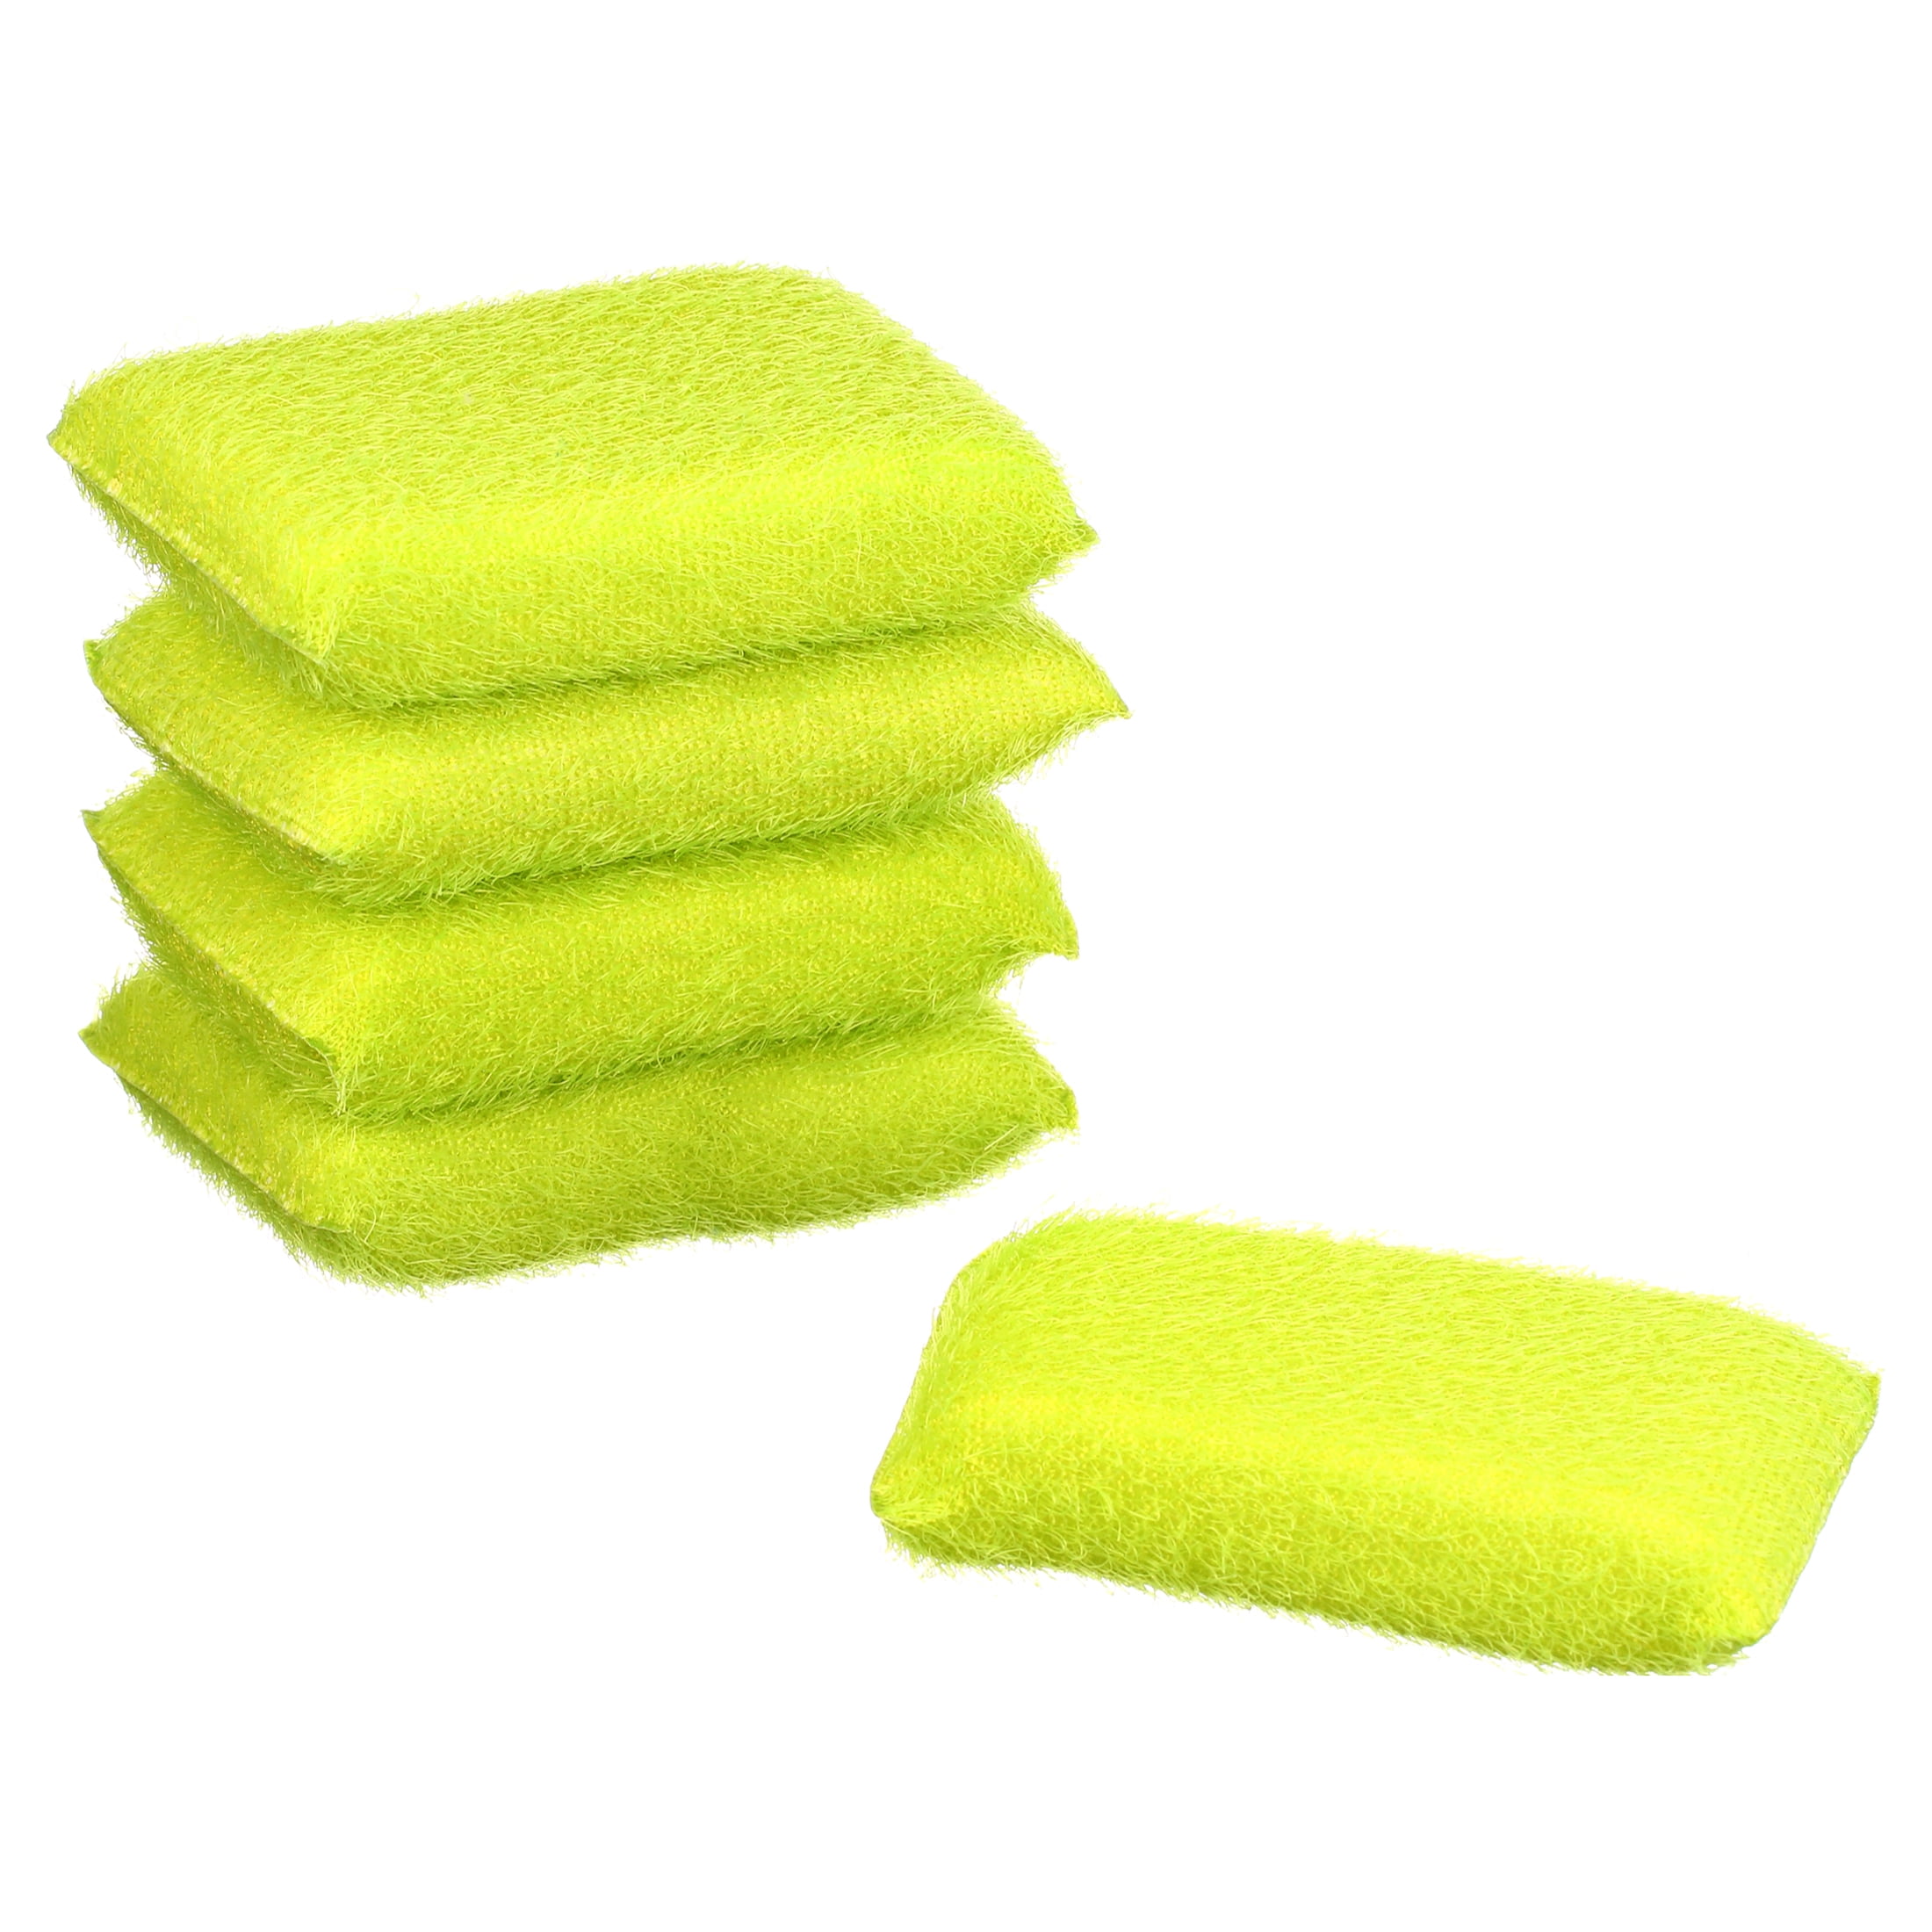 PjtewaweCar Exterior AccessoriesCar Wash Sponges Large Cleaning Sponges Pad  Cleaning Washing Sponges For Kitchen With Vacuum Compressed Packing